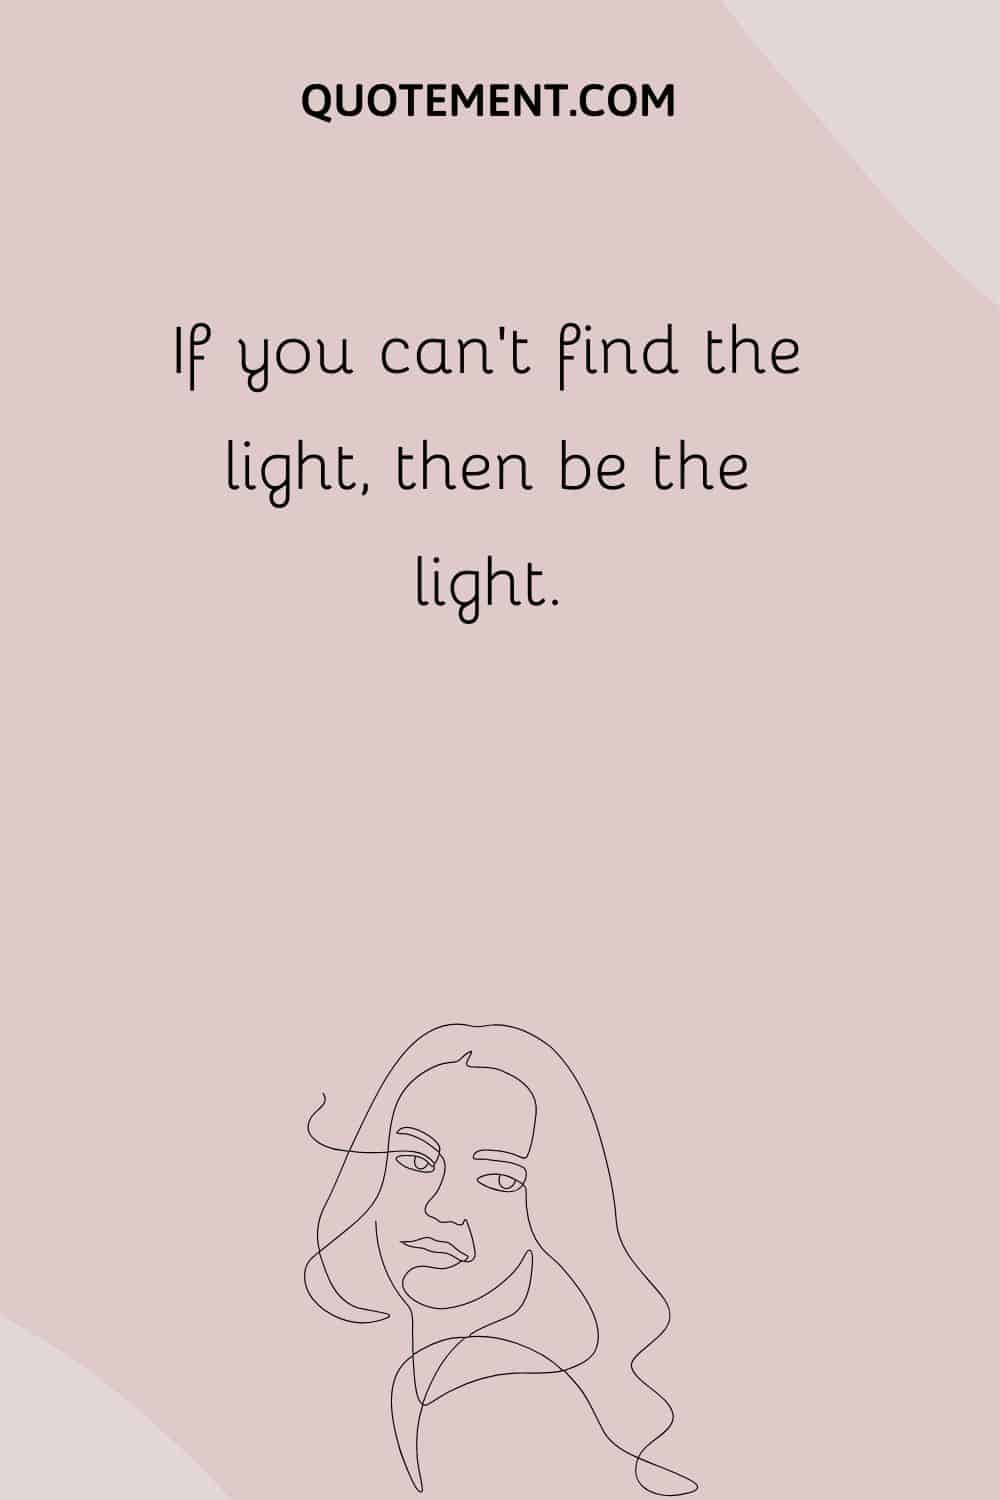 If you can’t find the light, then be the light.